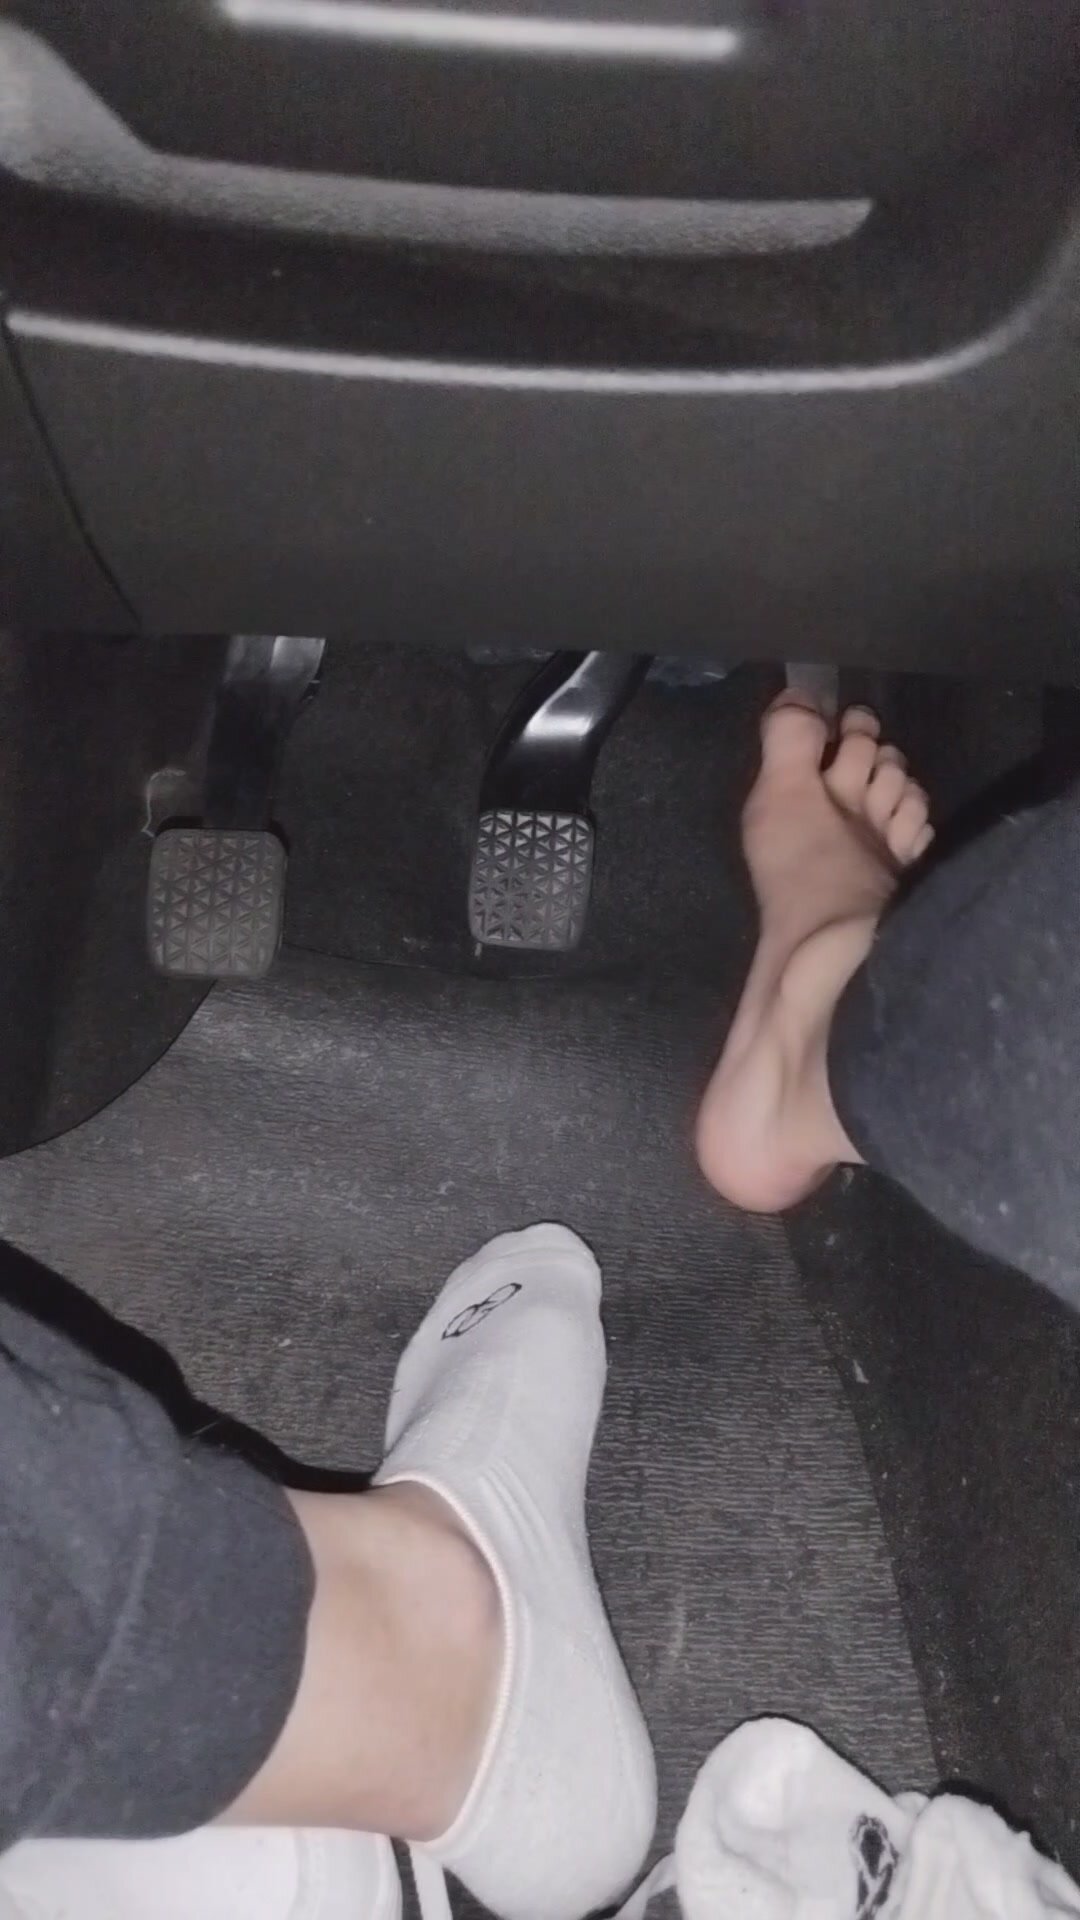 Pumping the gas barefoot